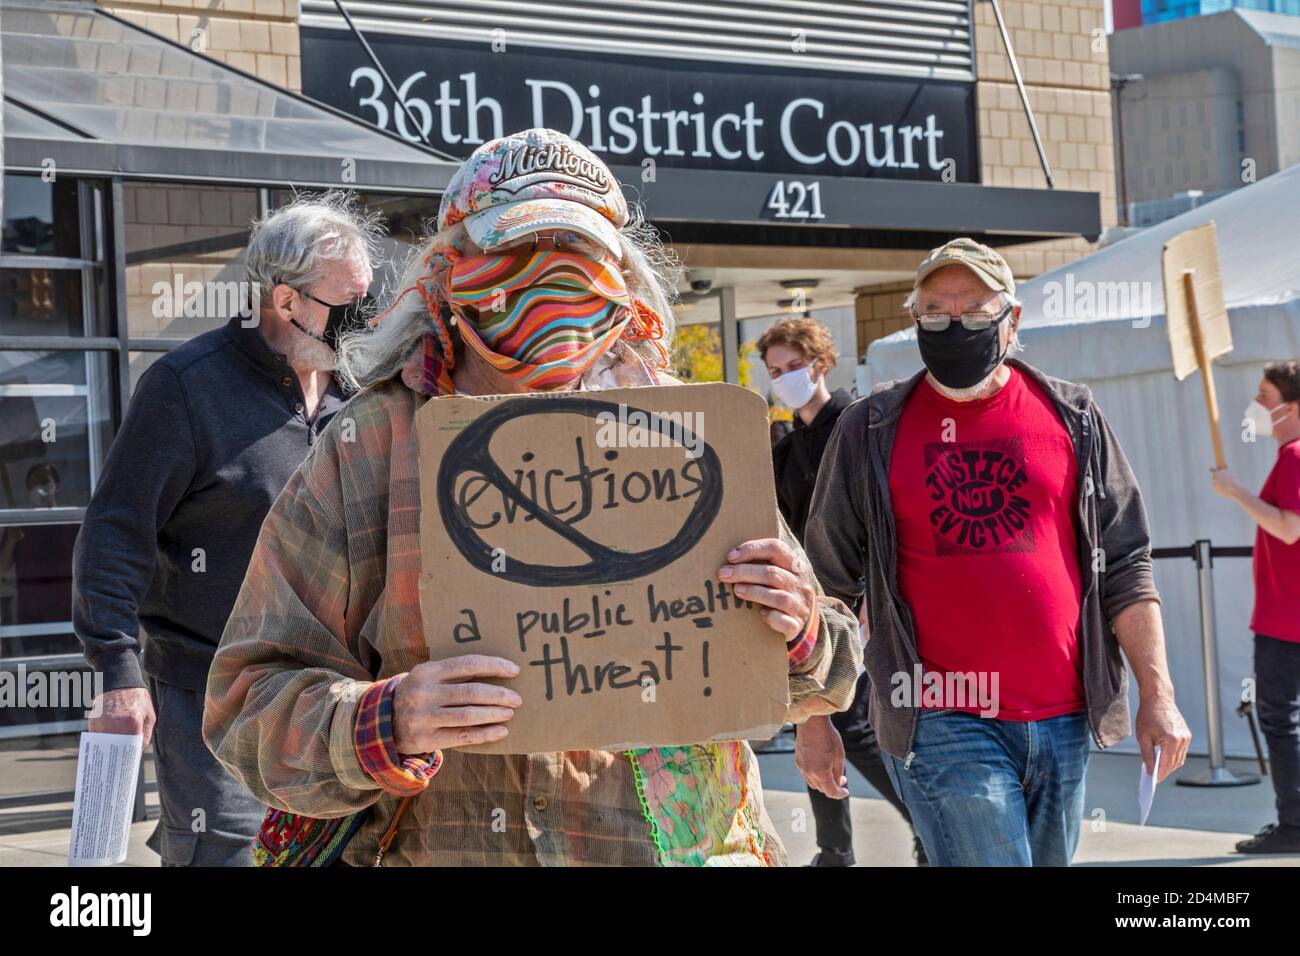 Detroit, Michigan, USA. 9th Oct, 2020. Protesters ask the chief judge of 36th District Court to halt evictions proceedings. They said that no one should be turned out of their home during the coronavirus public health crisis. Credit: Jim West/Alamy Live News Stock Photo